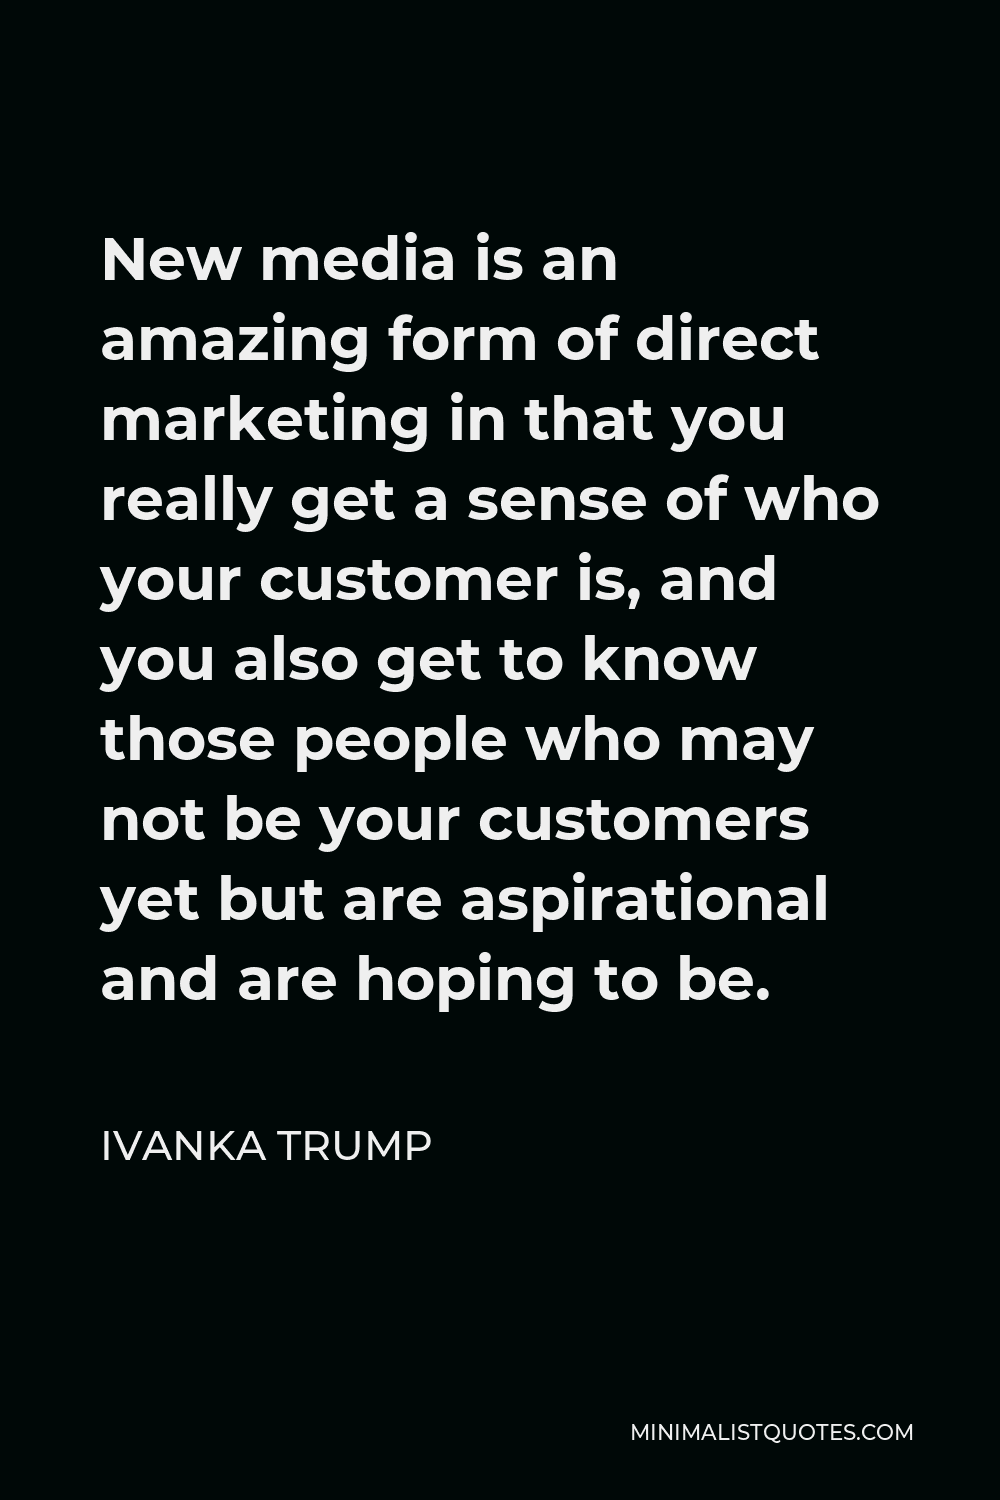 Ivanka Trump Quote - New media is an amazing form of direct marketing in that you really get a sense of who your customer is, and you also get to know those people who may not be your customers yet but are aspirational and are hoping to be.